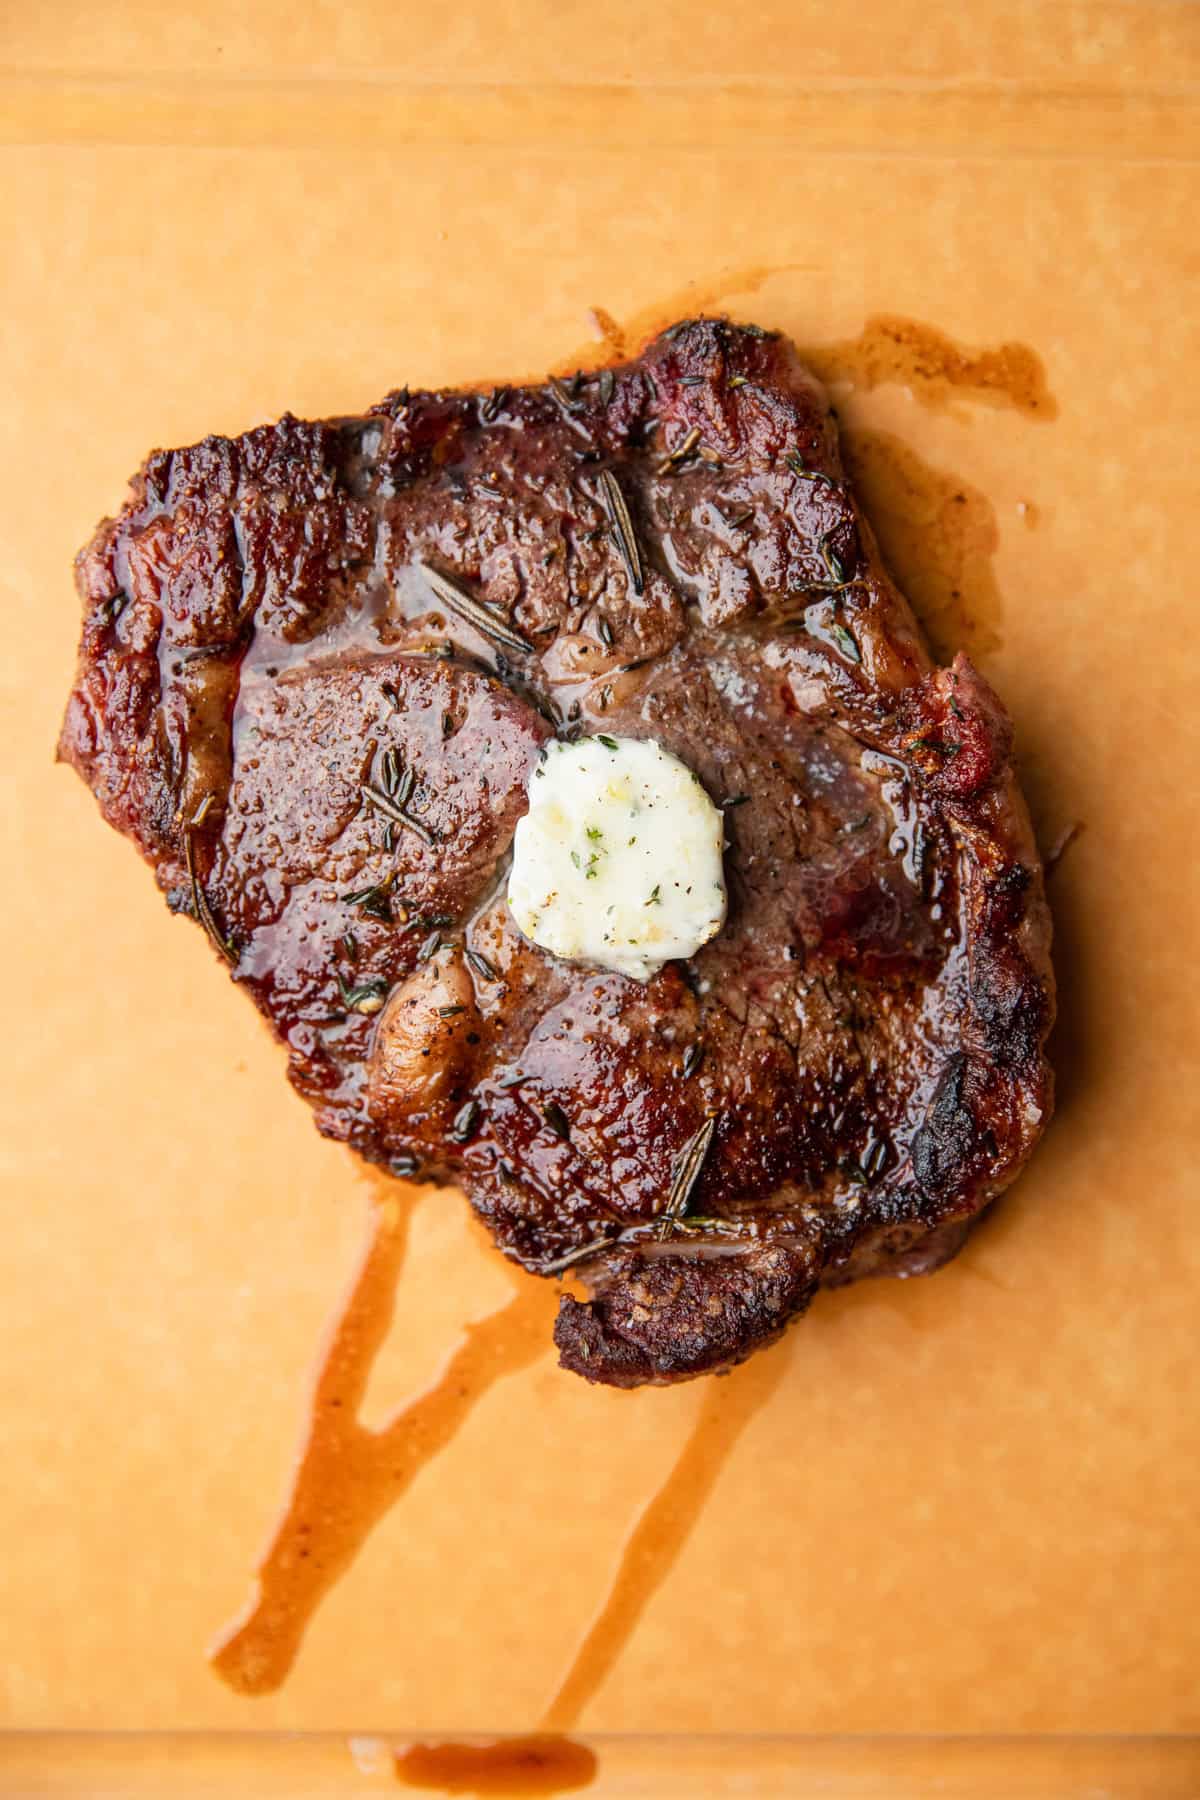 The herb and garlic butter placed on top of a cooked steak.